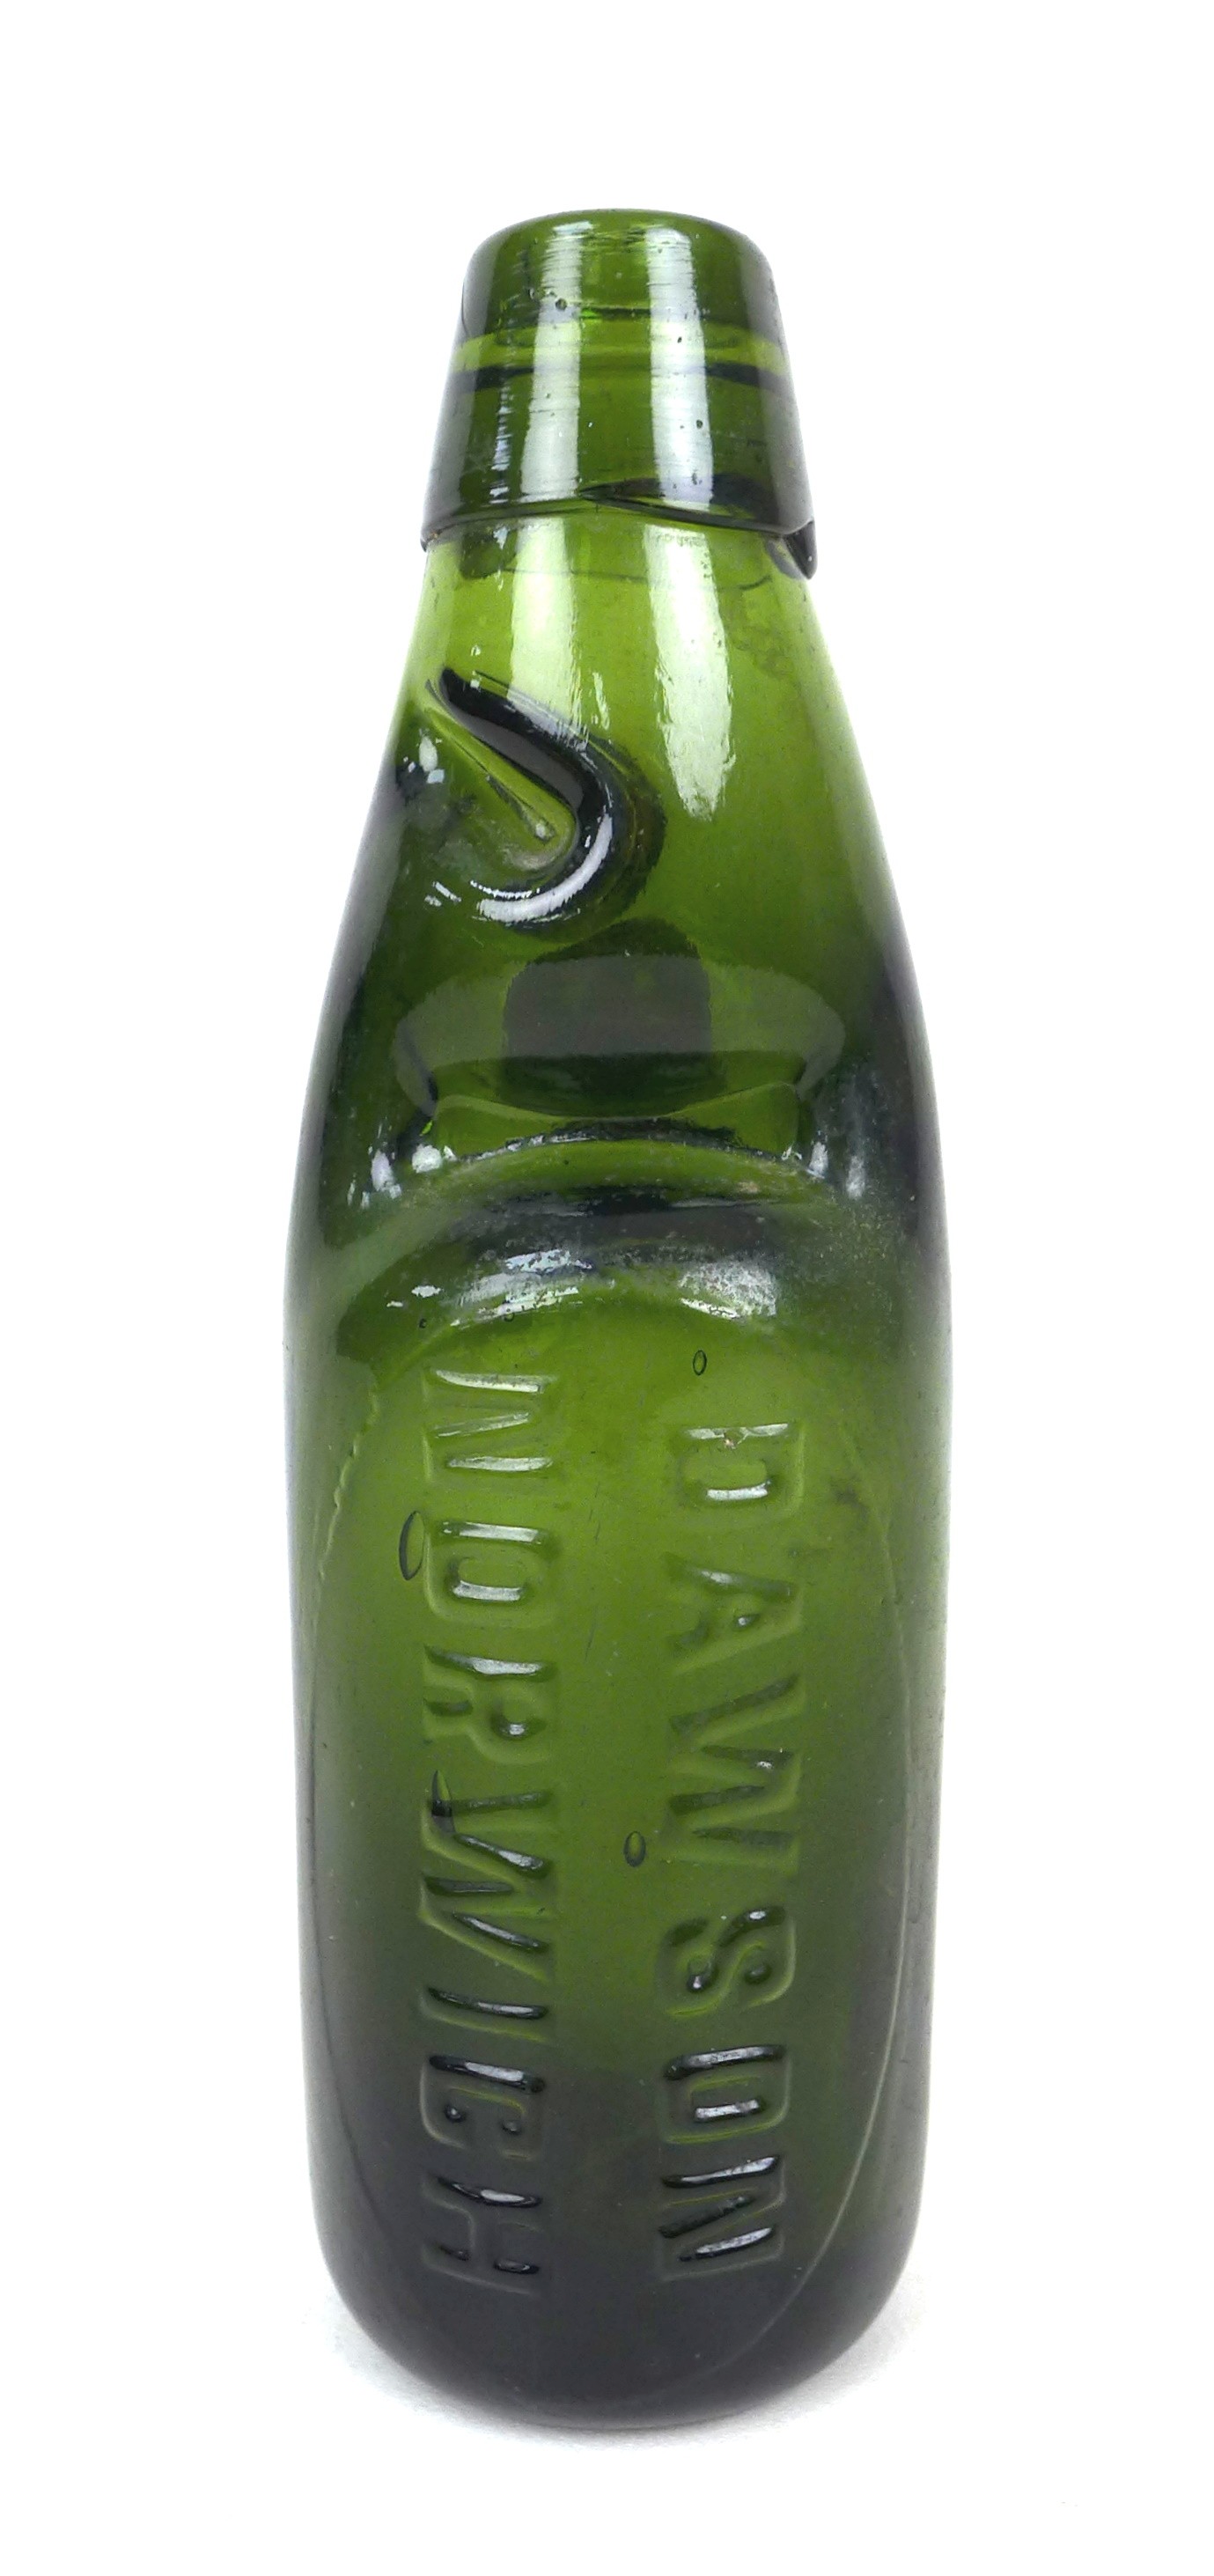 A Dawson of Norwich Codd bottle, dark green glass with marble still intact, heavily embossed 'DAWSON